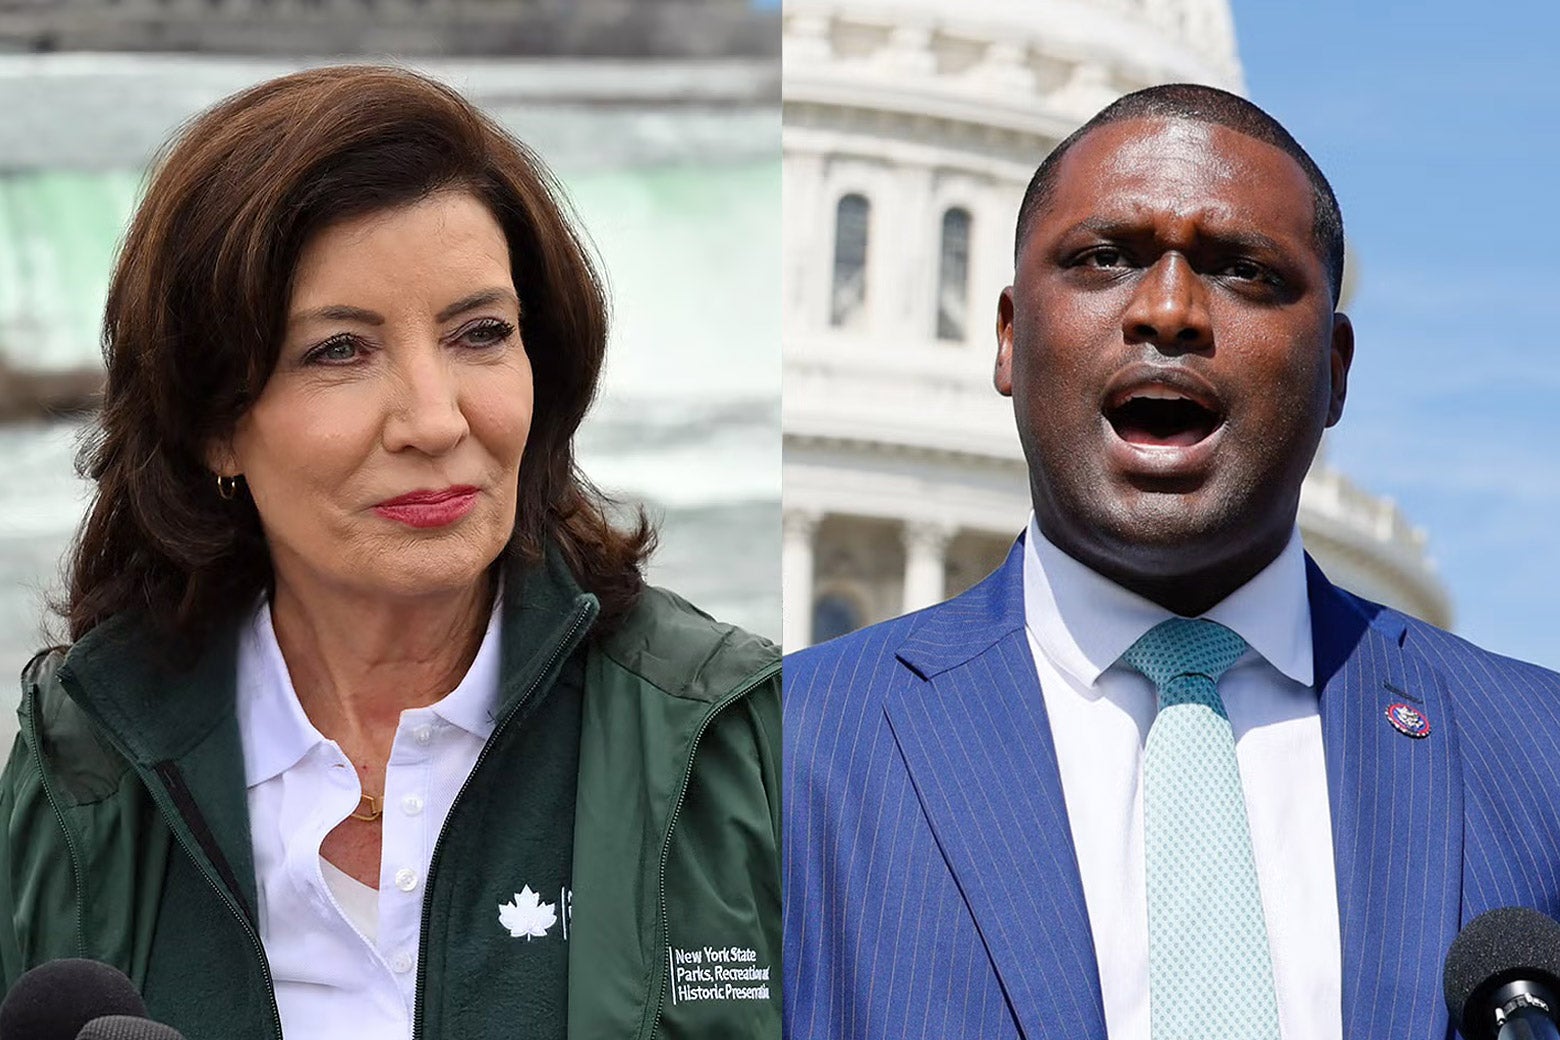 Kathy Hochul's congestion pricing delay, Mondaire Jones' House race, and New York Democrats' many woes.